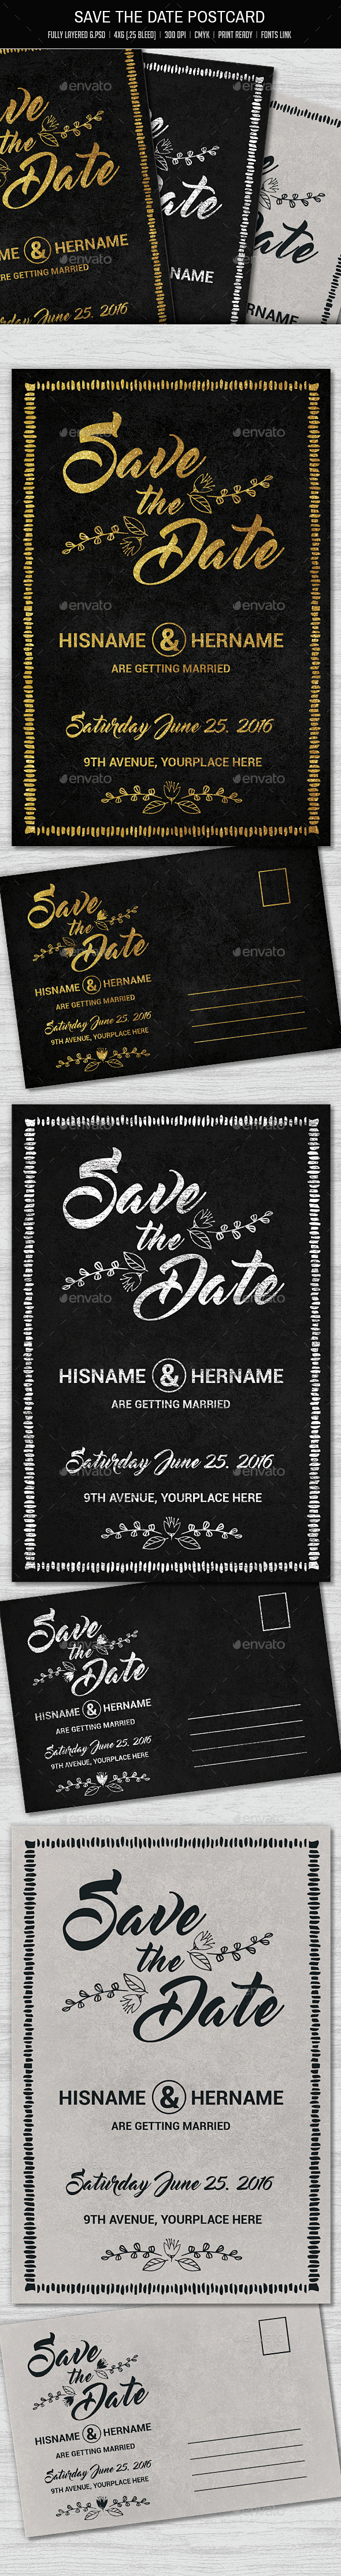 Save The Date Postcard by creativeartx | GraphicRiver